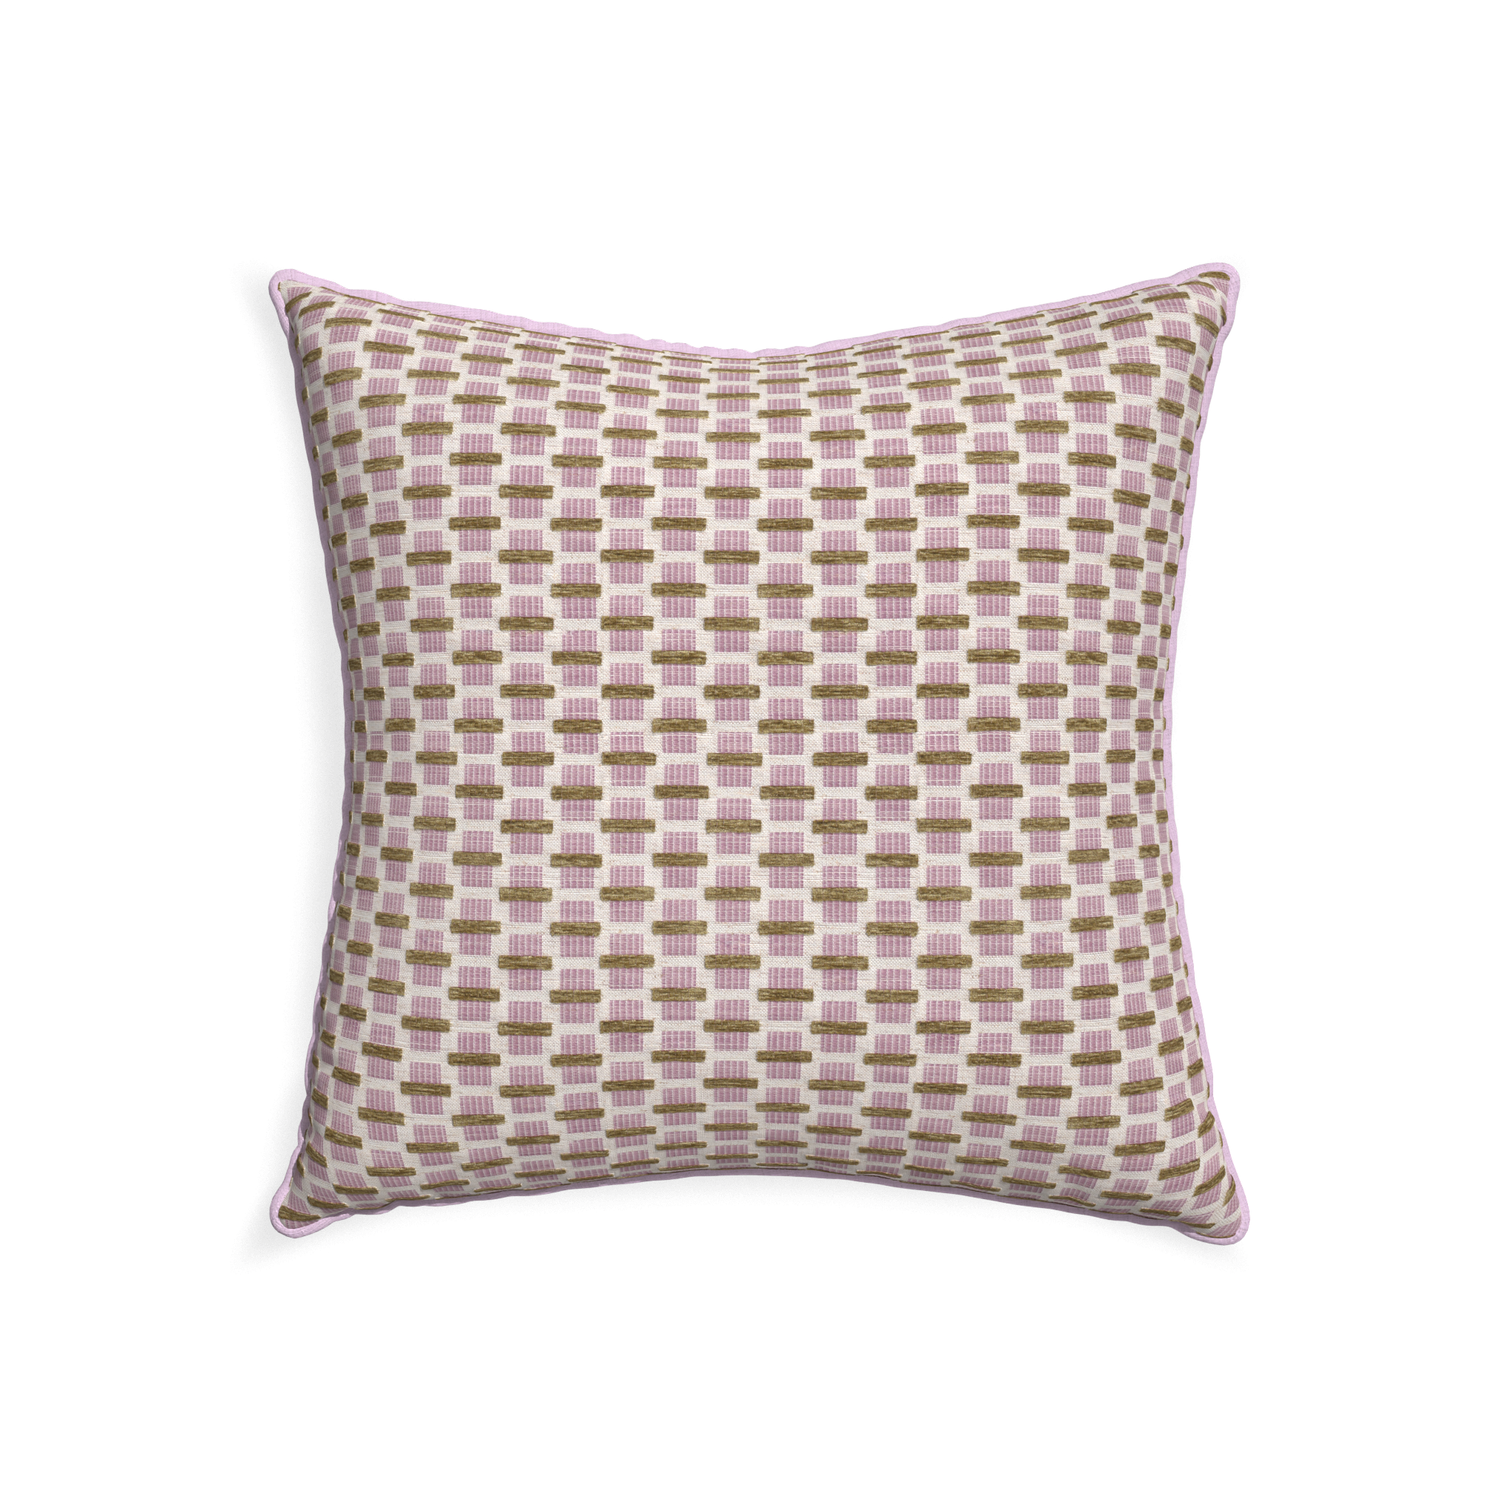 22-square willow orchid custom pink geometric chenillepillow with l piping on white background